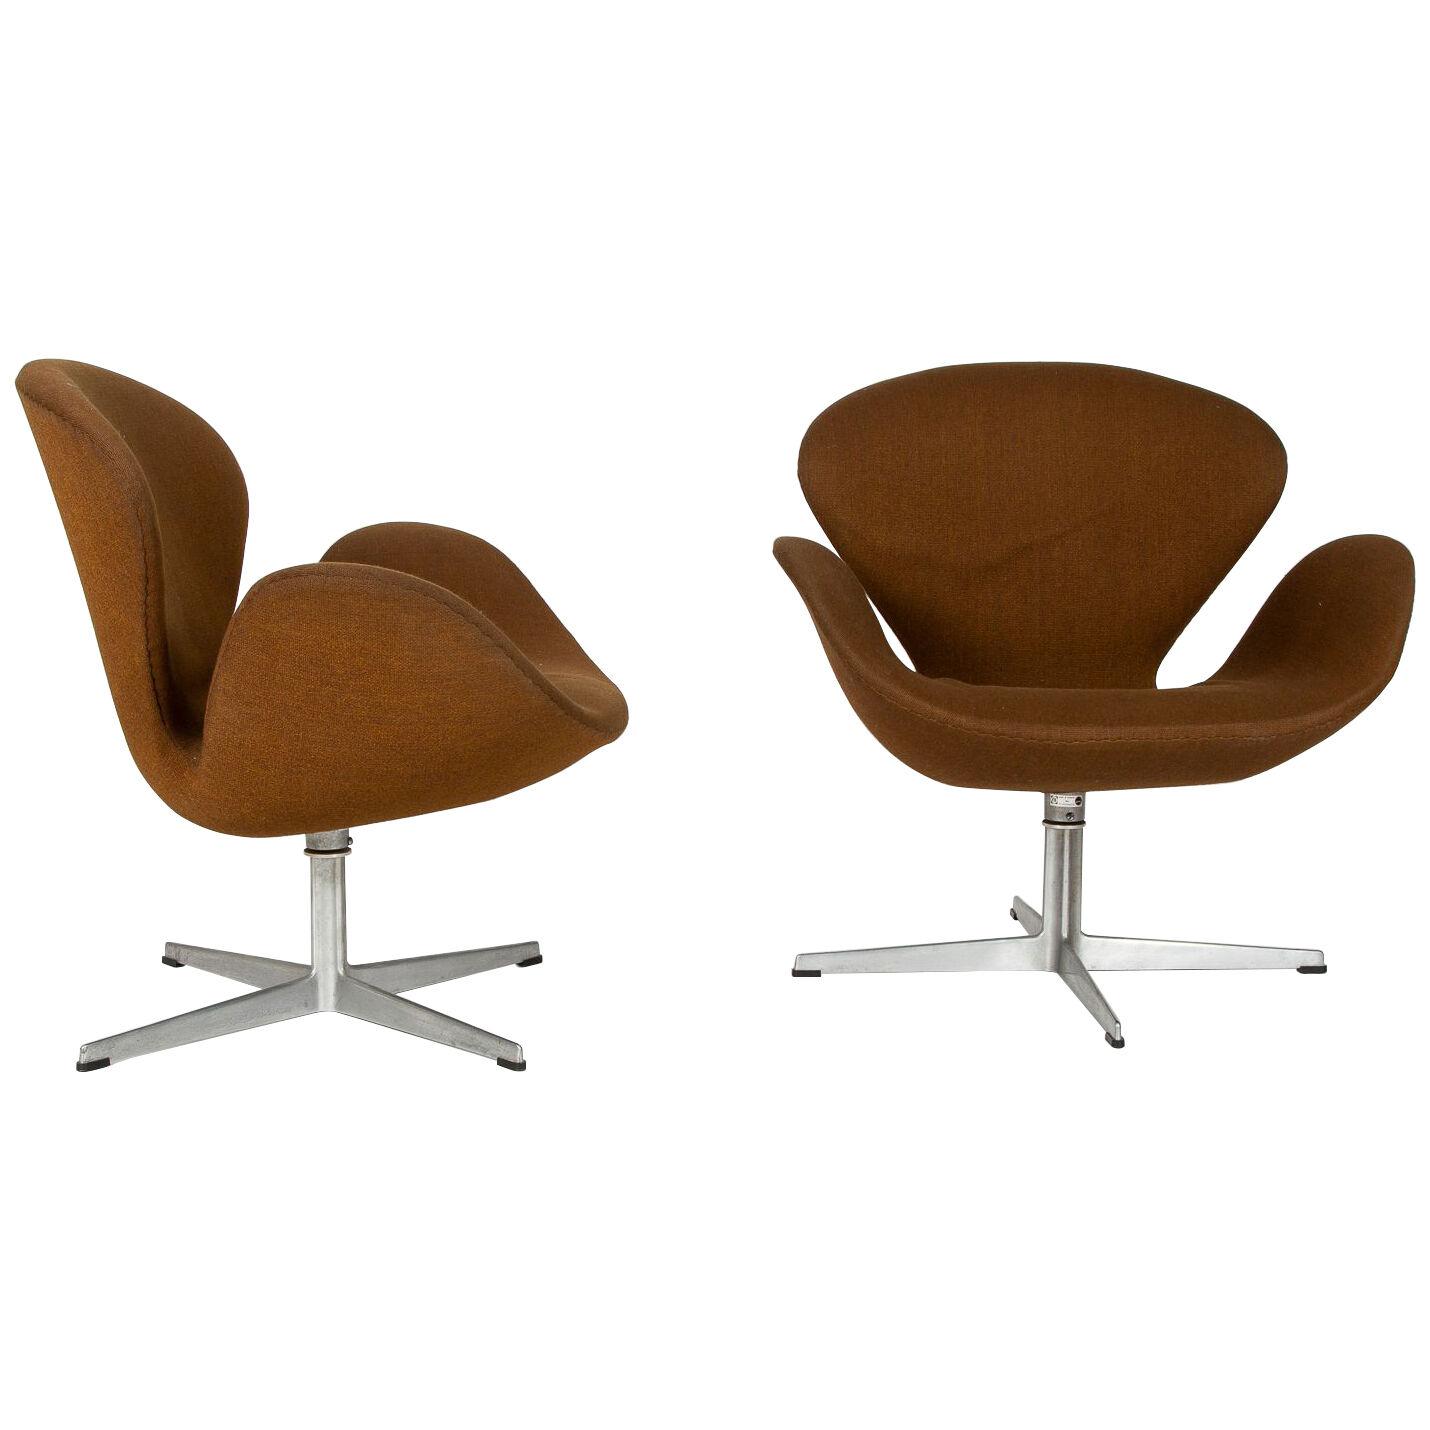 A pair of Swan lounge chairs designed by Arne Jacobsen, first model, dated 1970.